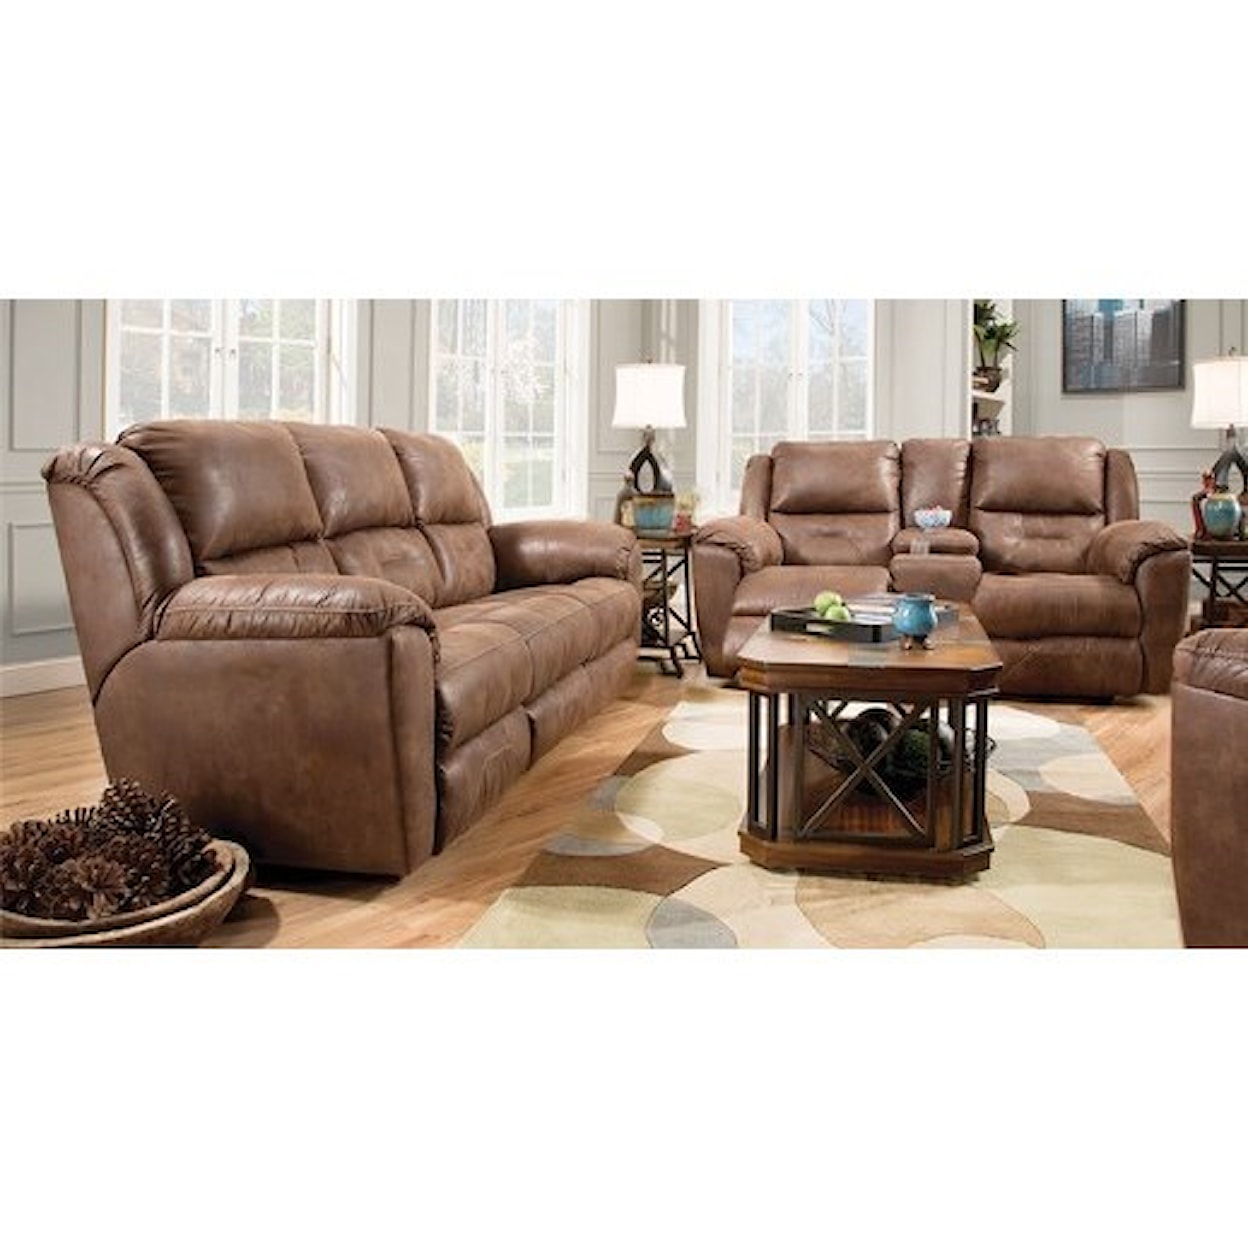 Southern Motion Pandora Reclining Living Room Group